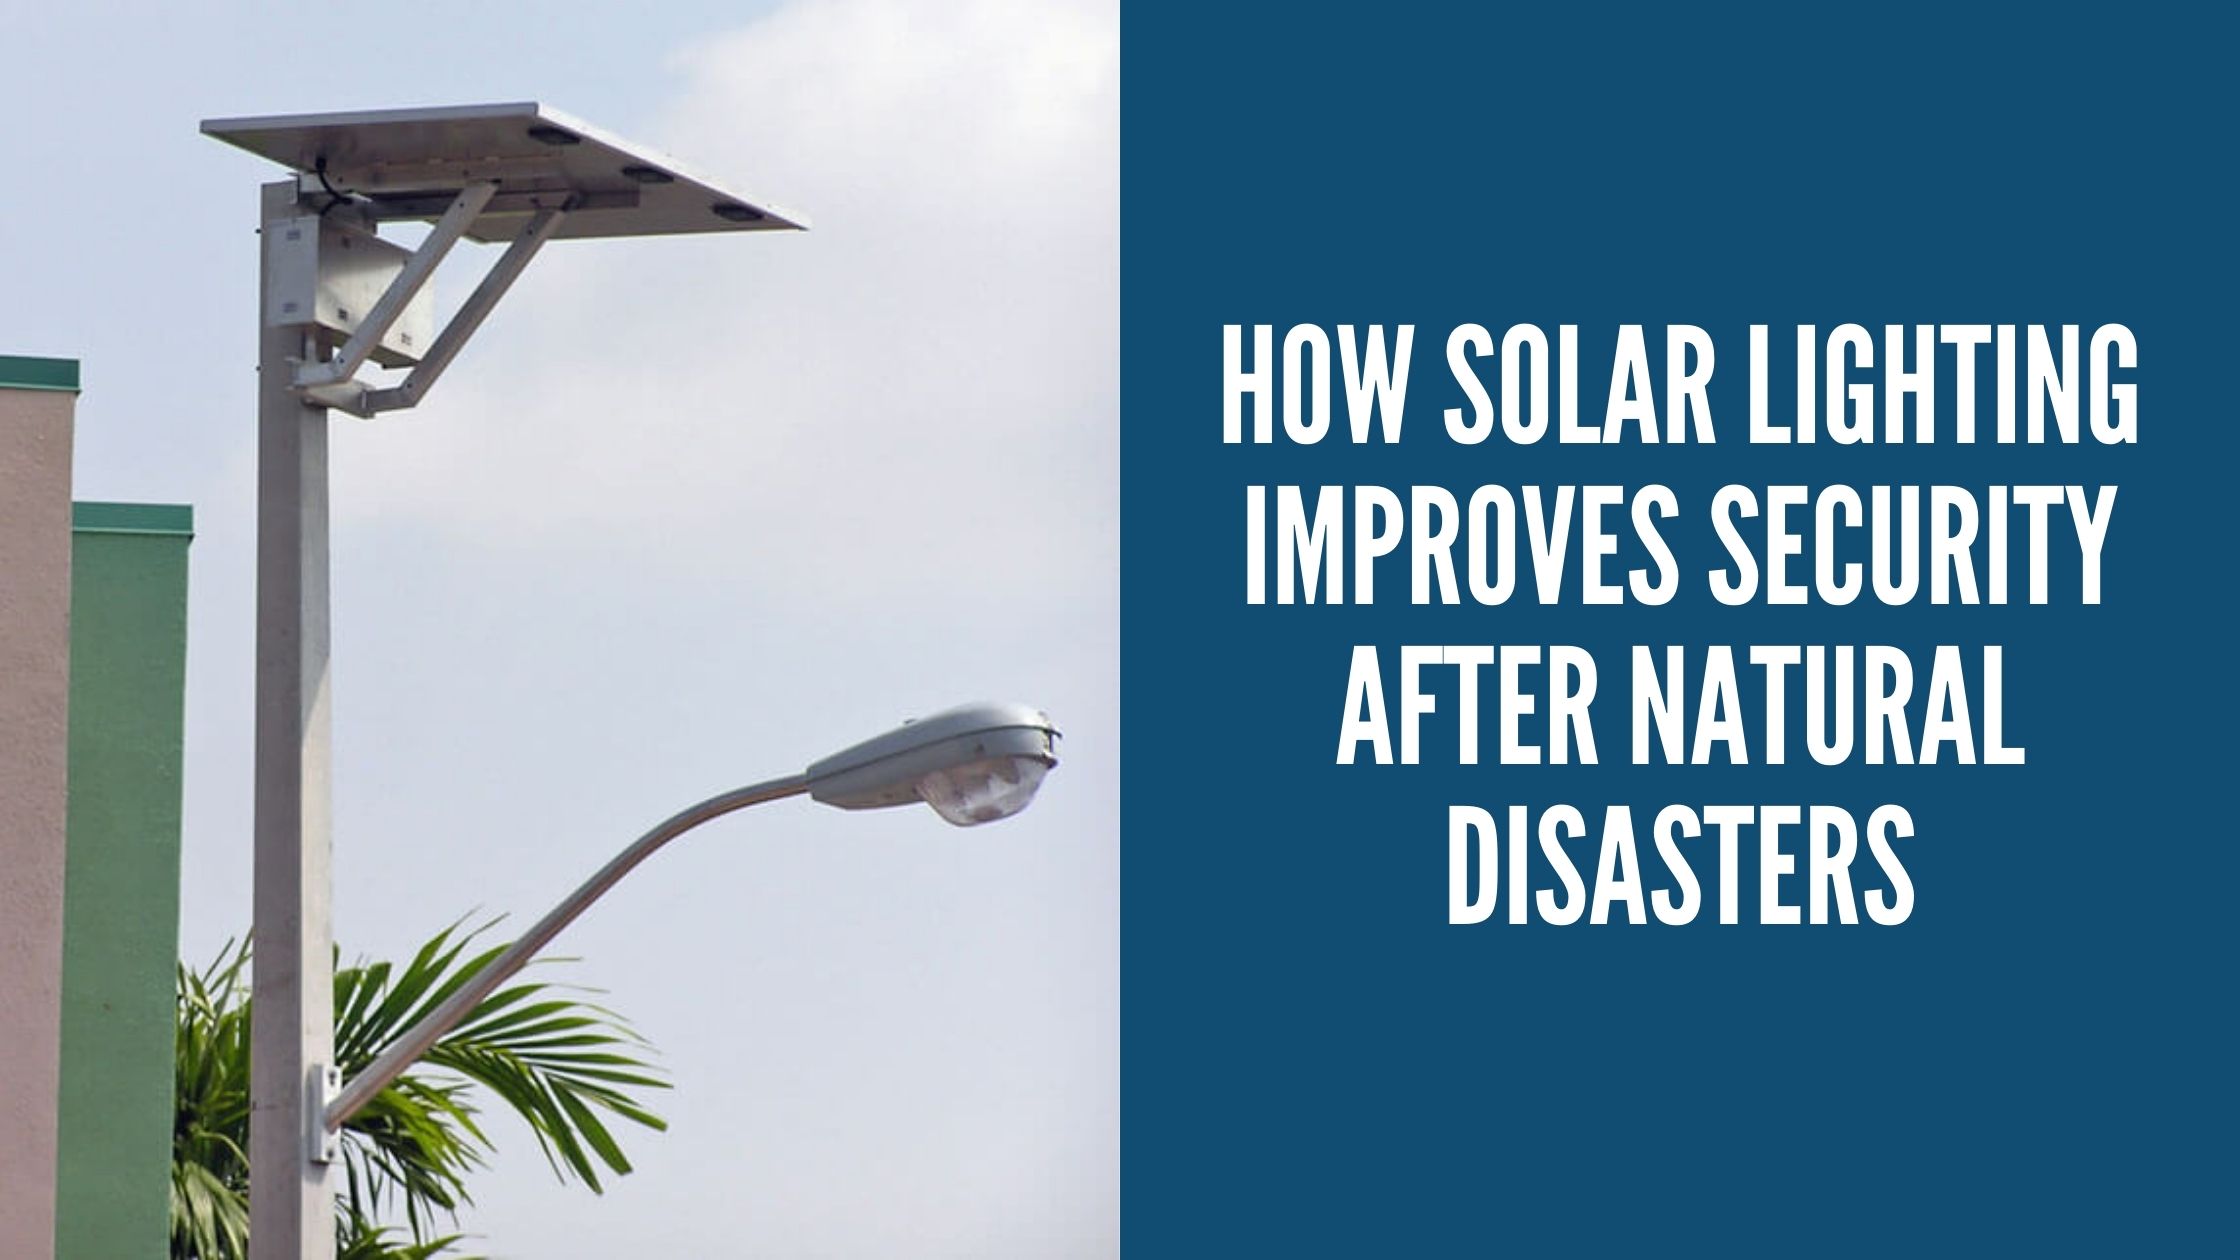 How Solar Lighting Improves Security after Natural Disasters